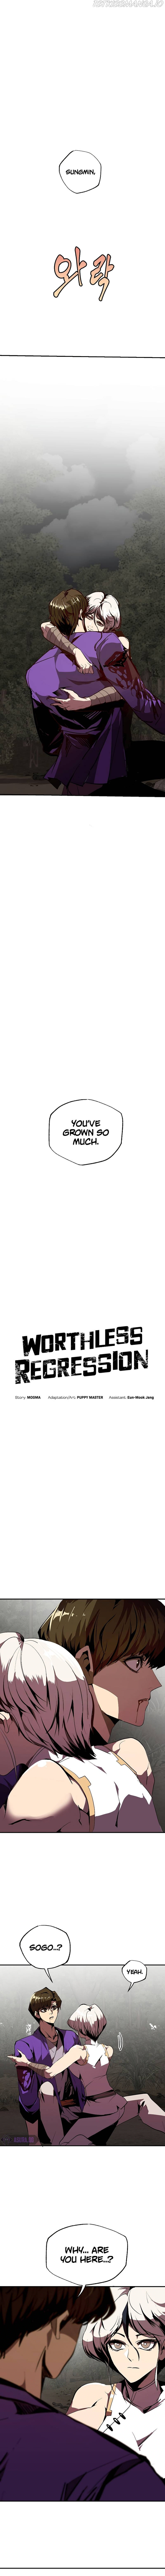 Worthless Regression - Page 2